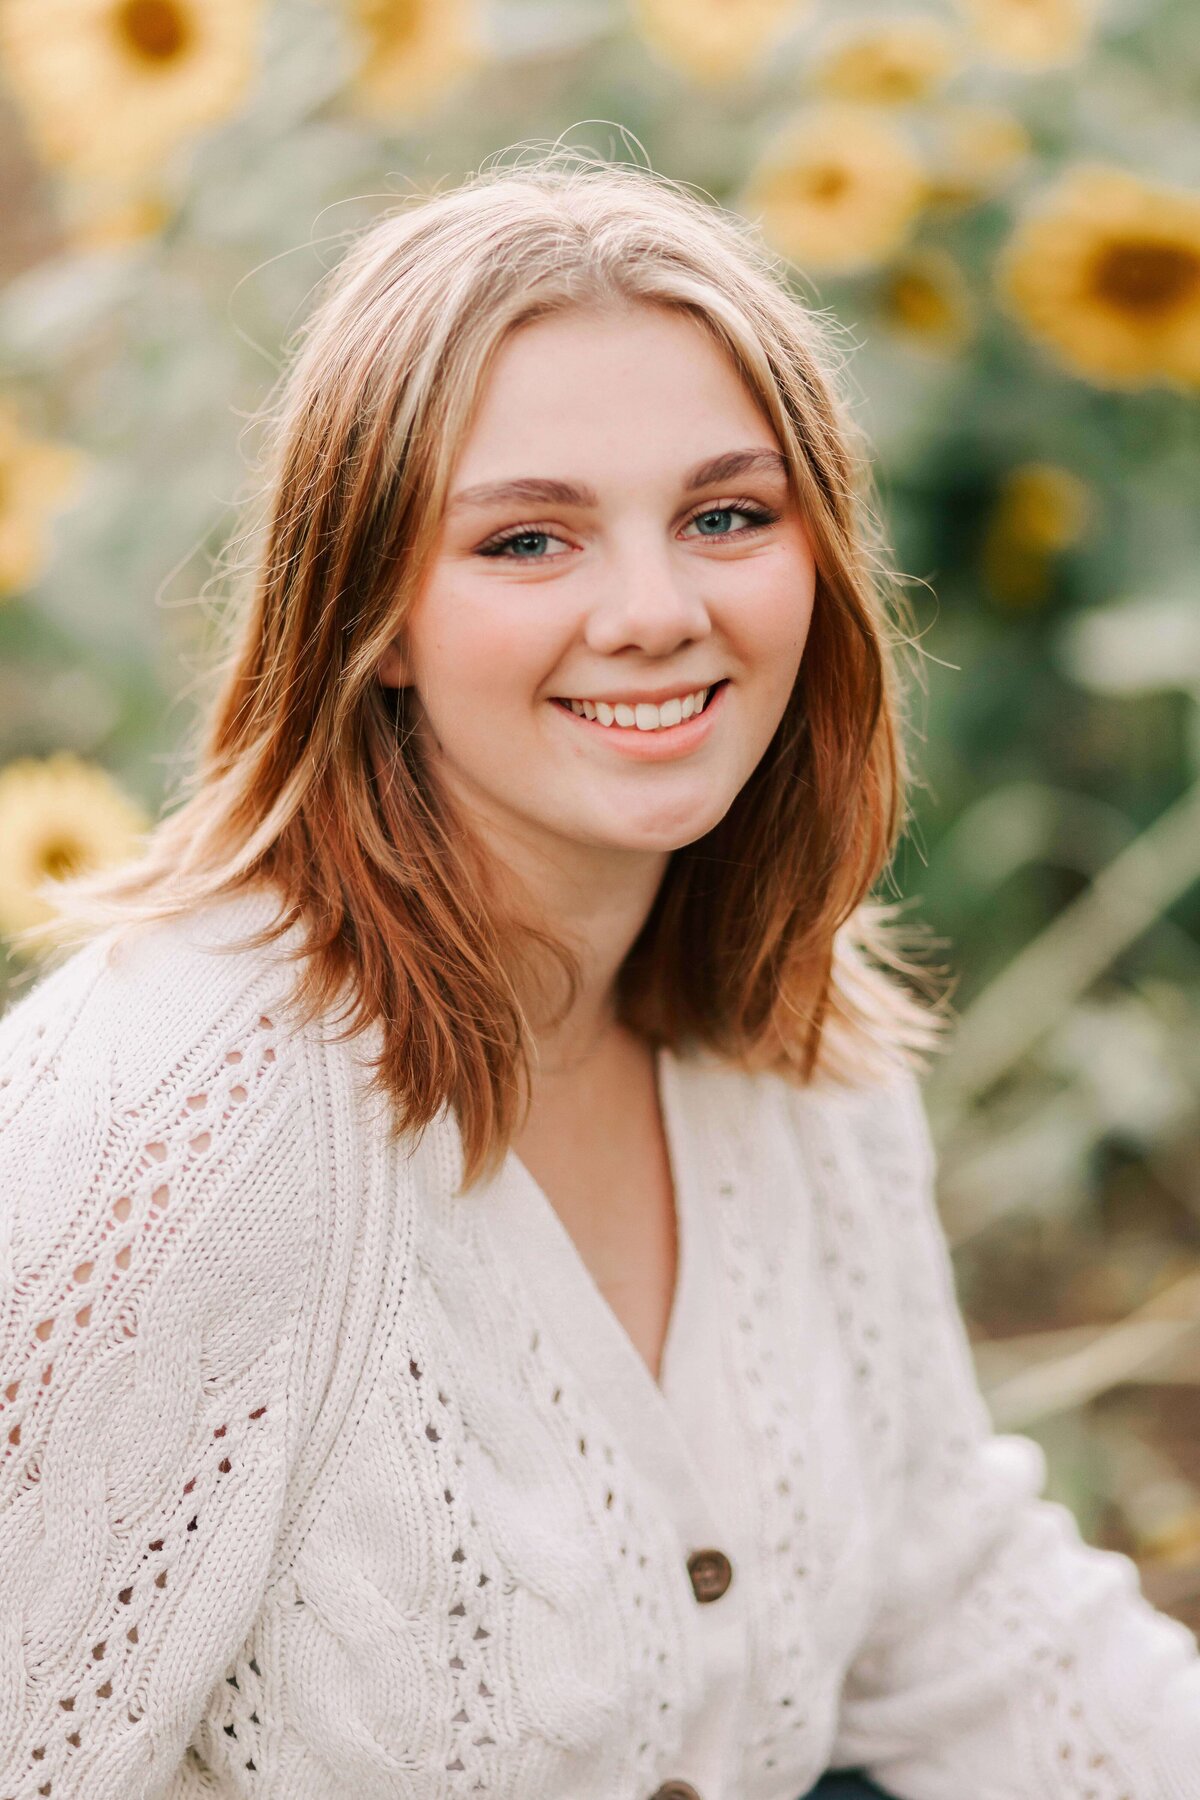 A girl in a white sweater sits in a sunflower field